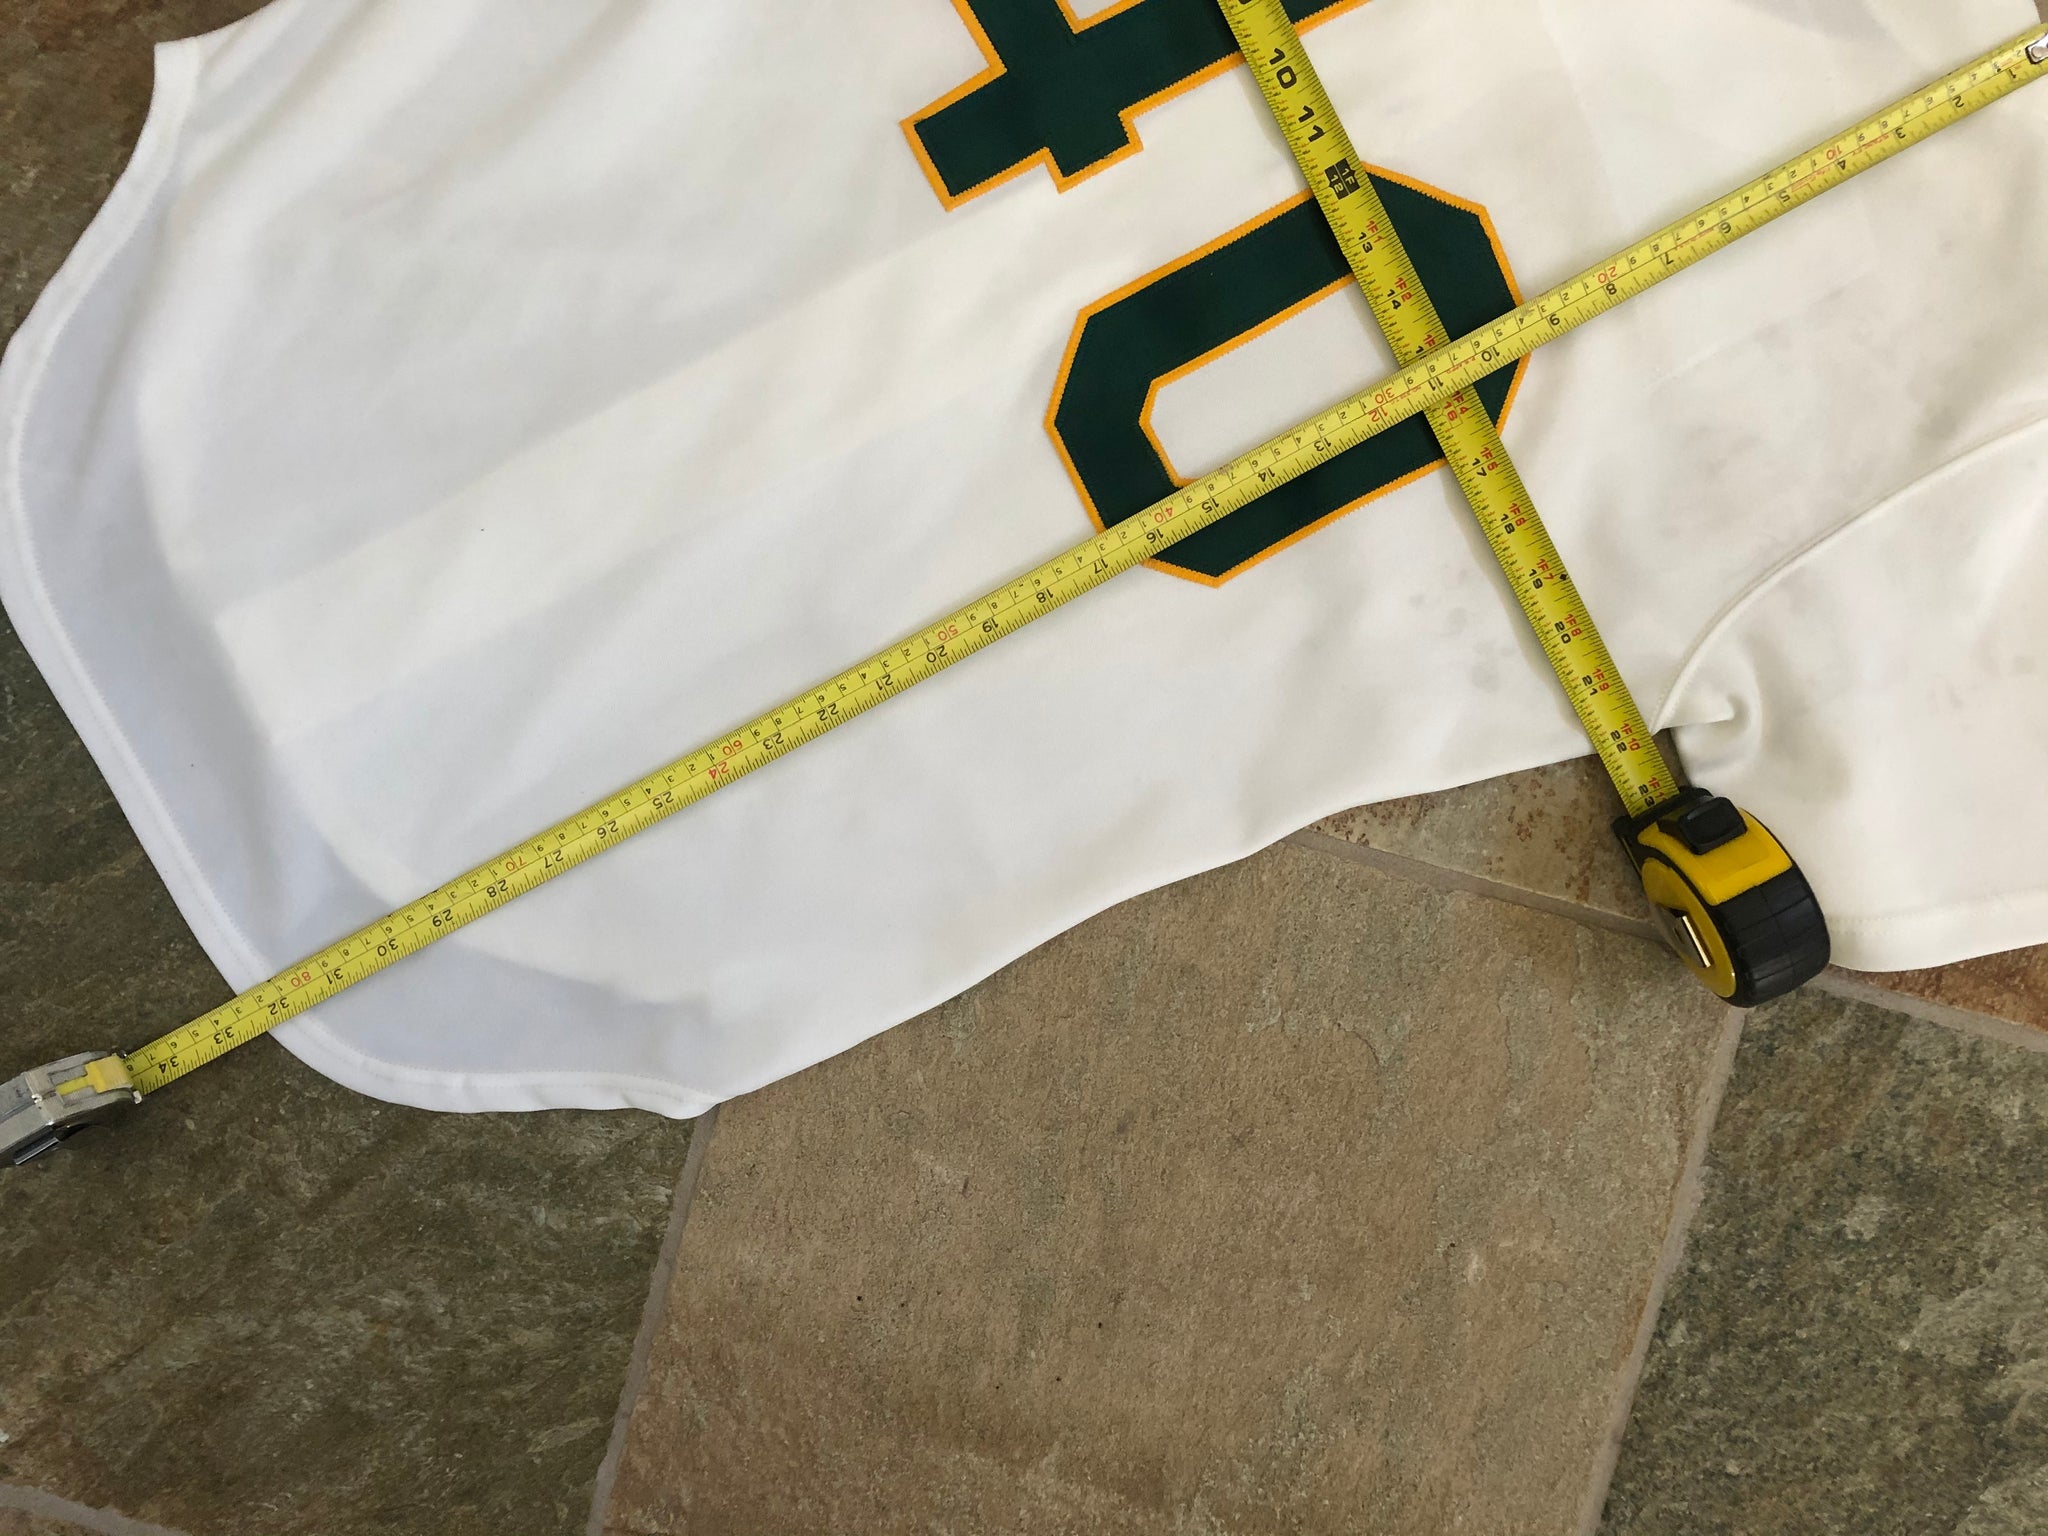 Vintage Oakland Athletics Rawlings Authentic Baseball Jersey, Size 40, –  Stuck In The 90s Sports